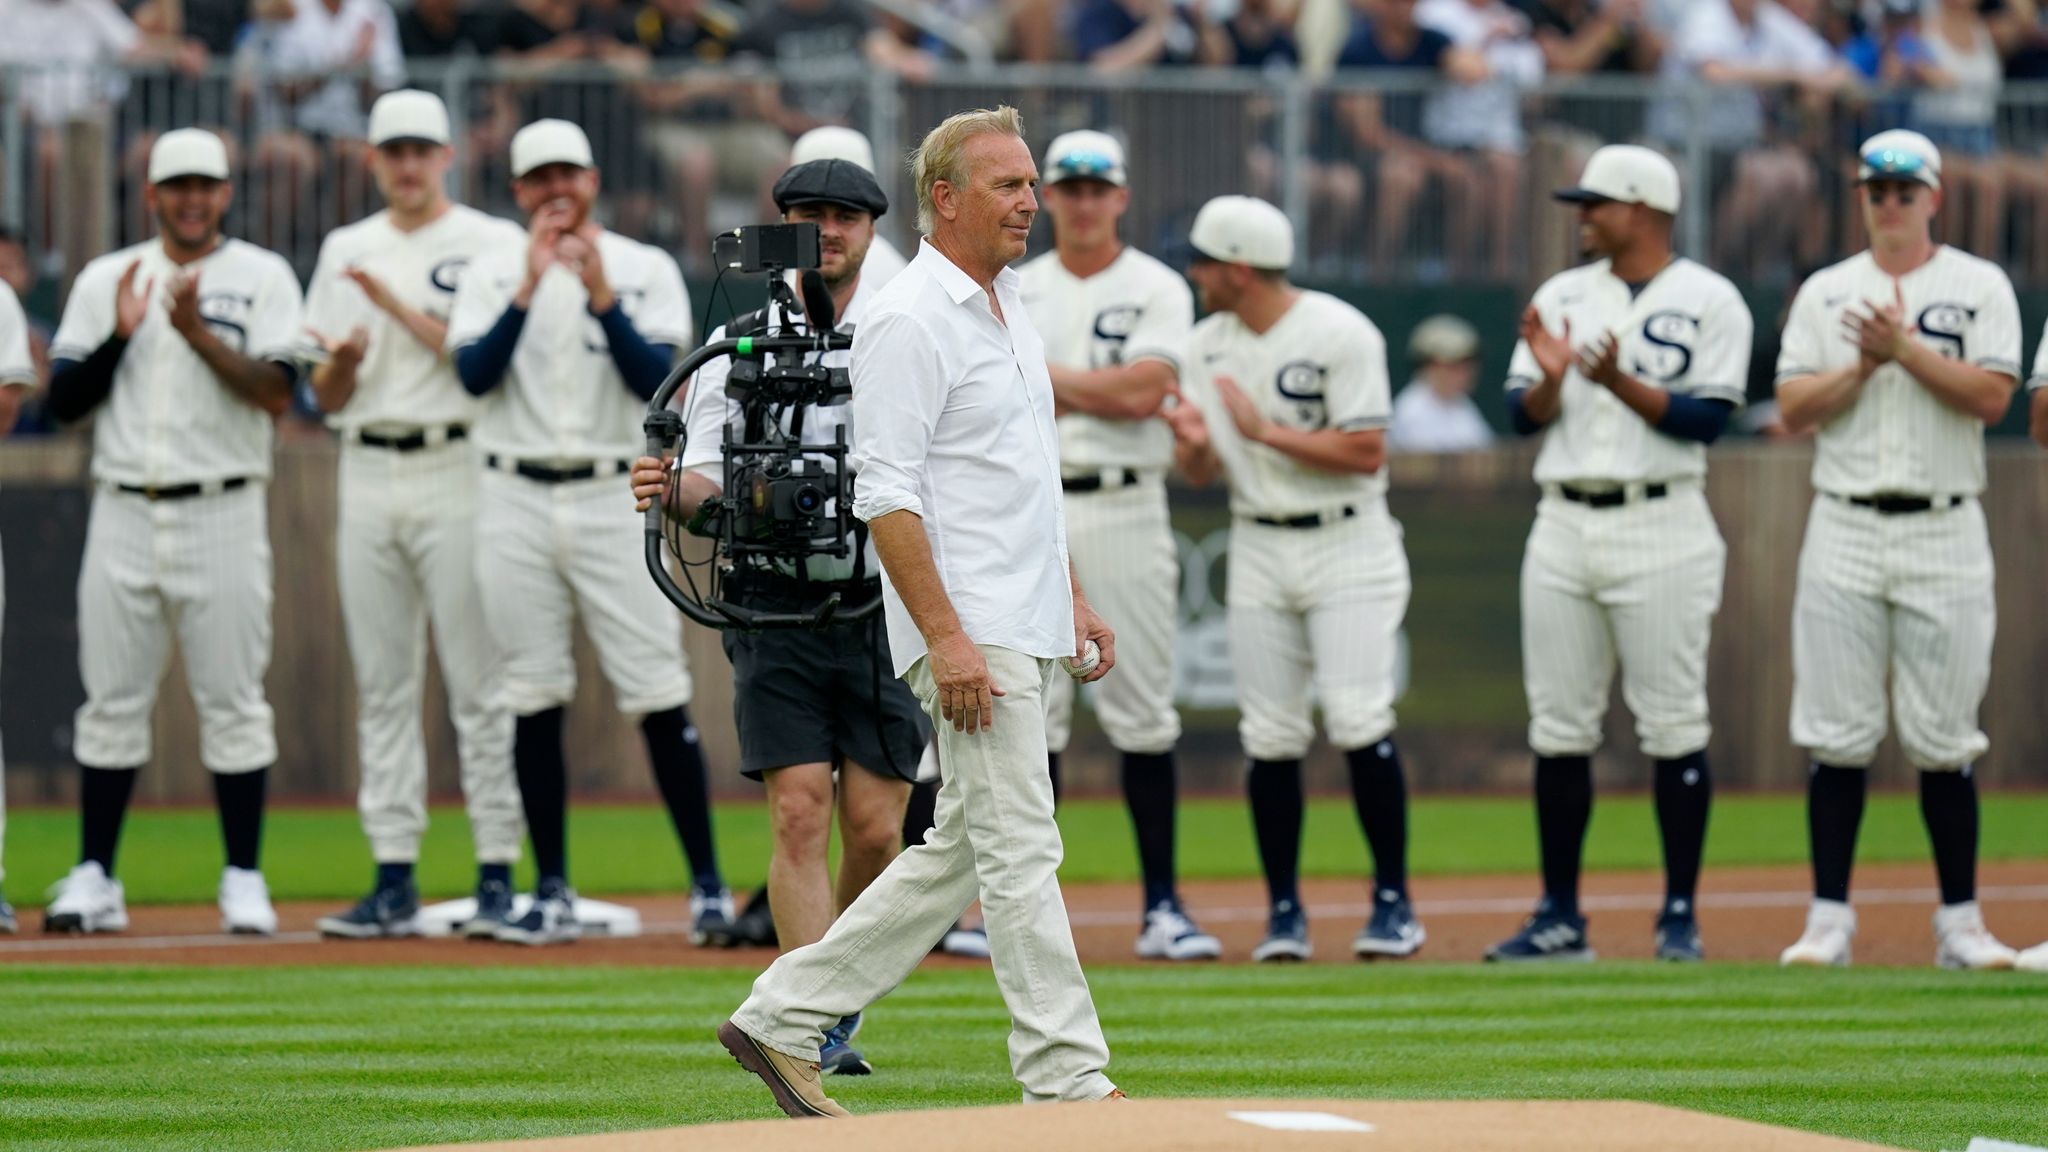 Kevin Costner returns to 'Field of Dreams' as Chicago White Sox